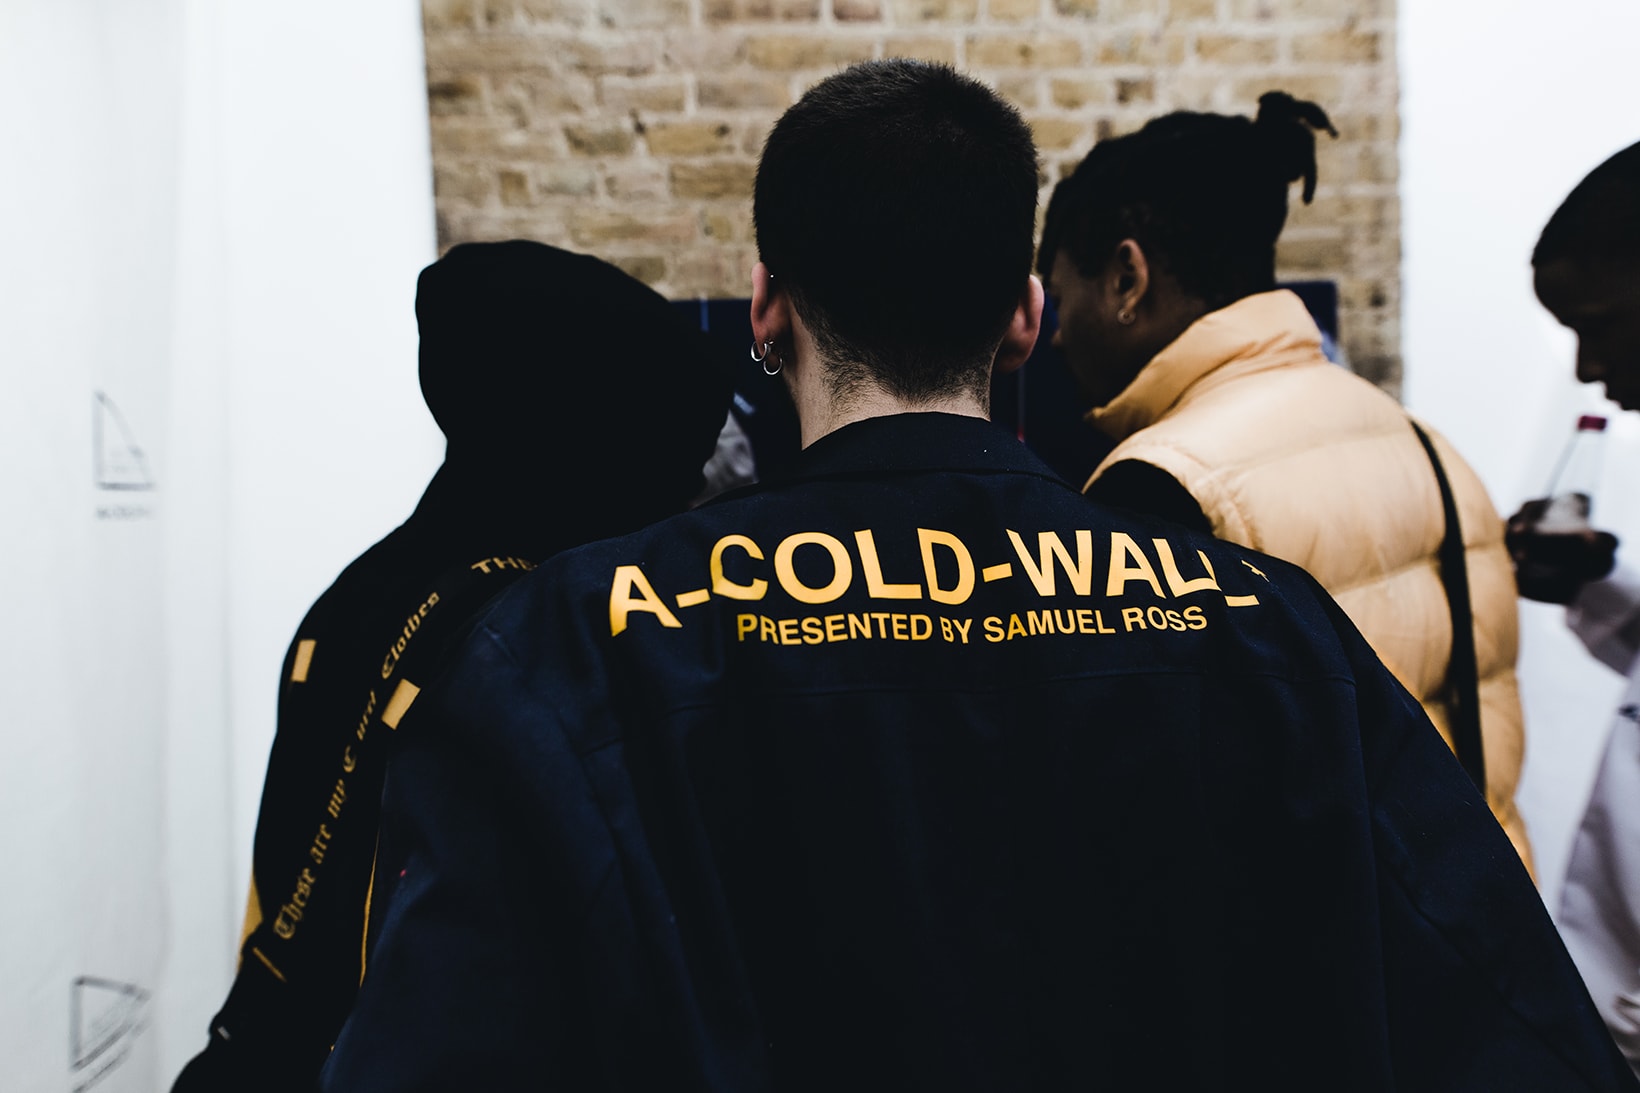 A-Cold-Wall Academia Correction Workshop Pop-Up Inside Looks